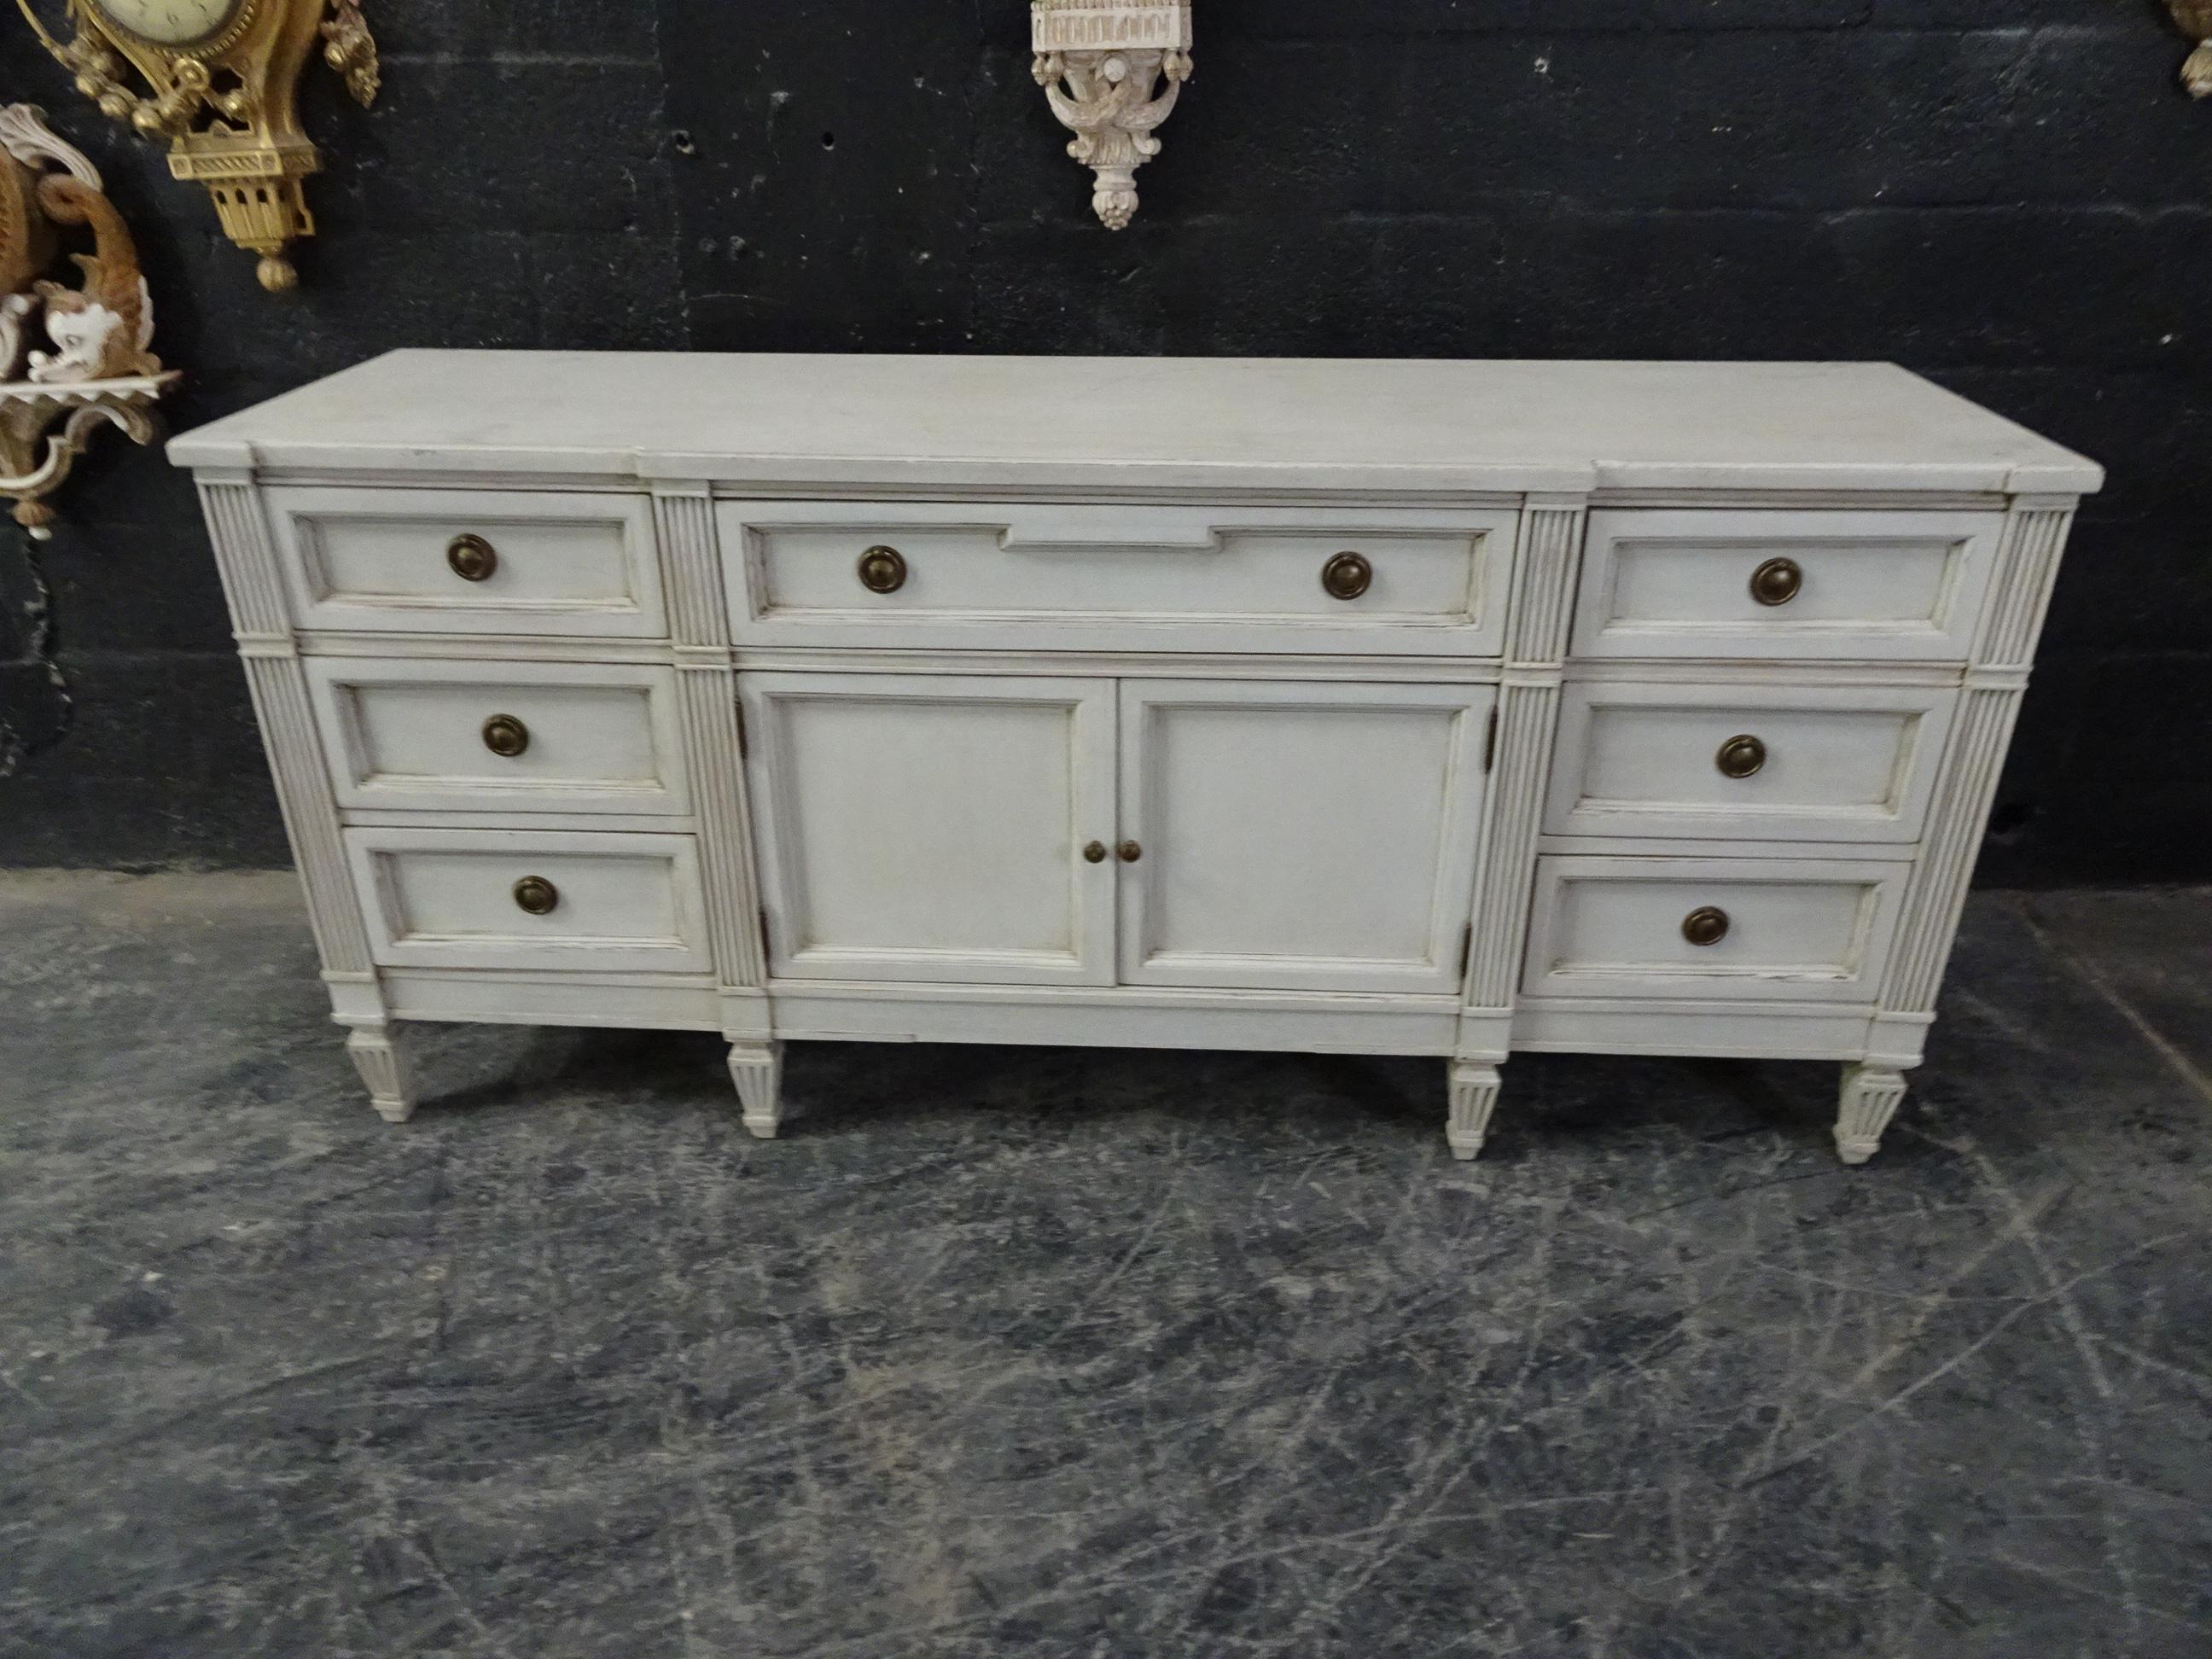 This is a Gustavian style 7-drawer dresser, its been restored and repainted with milk paints 